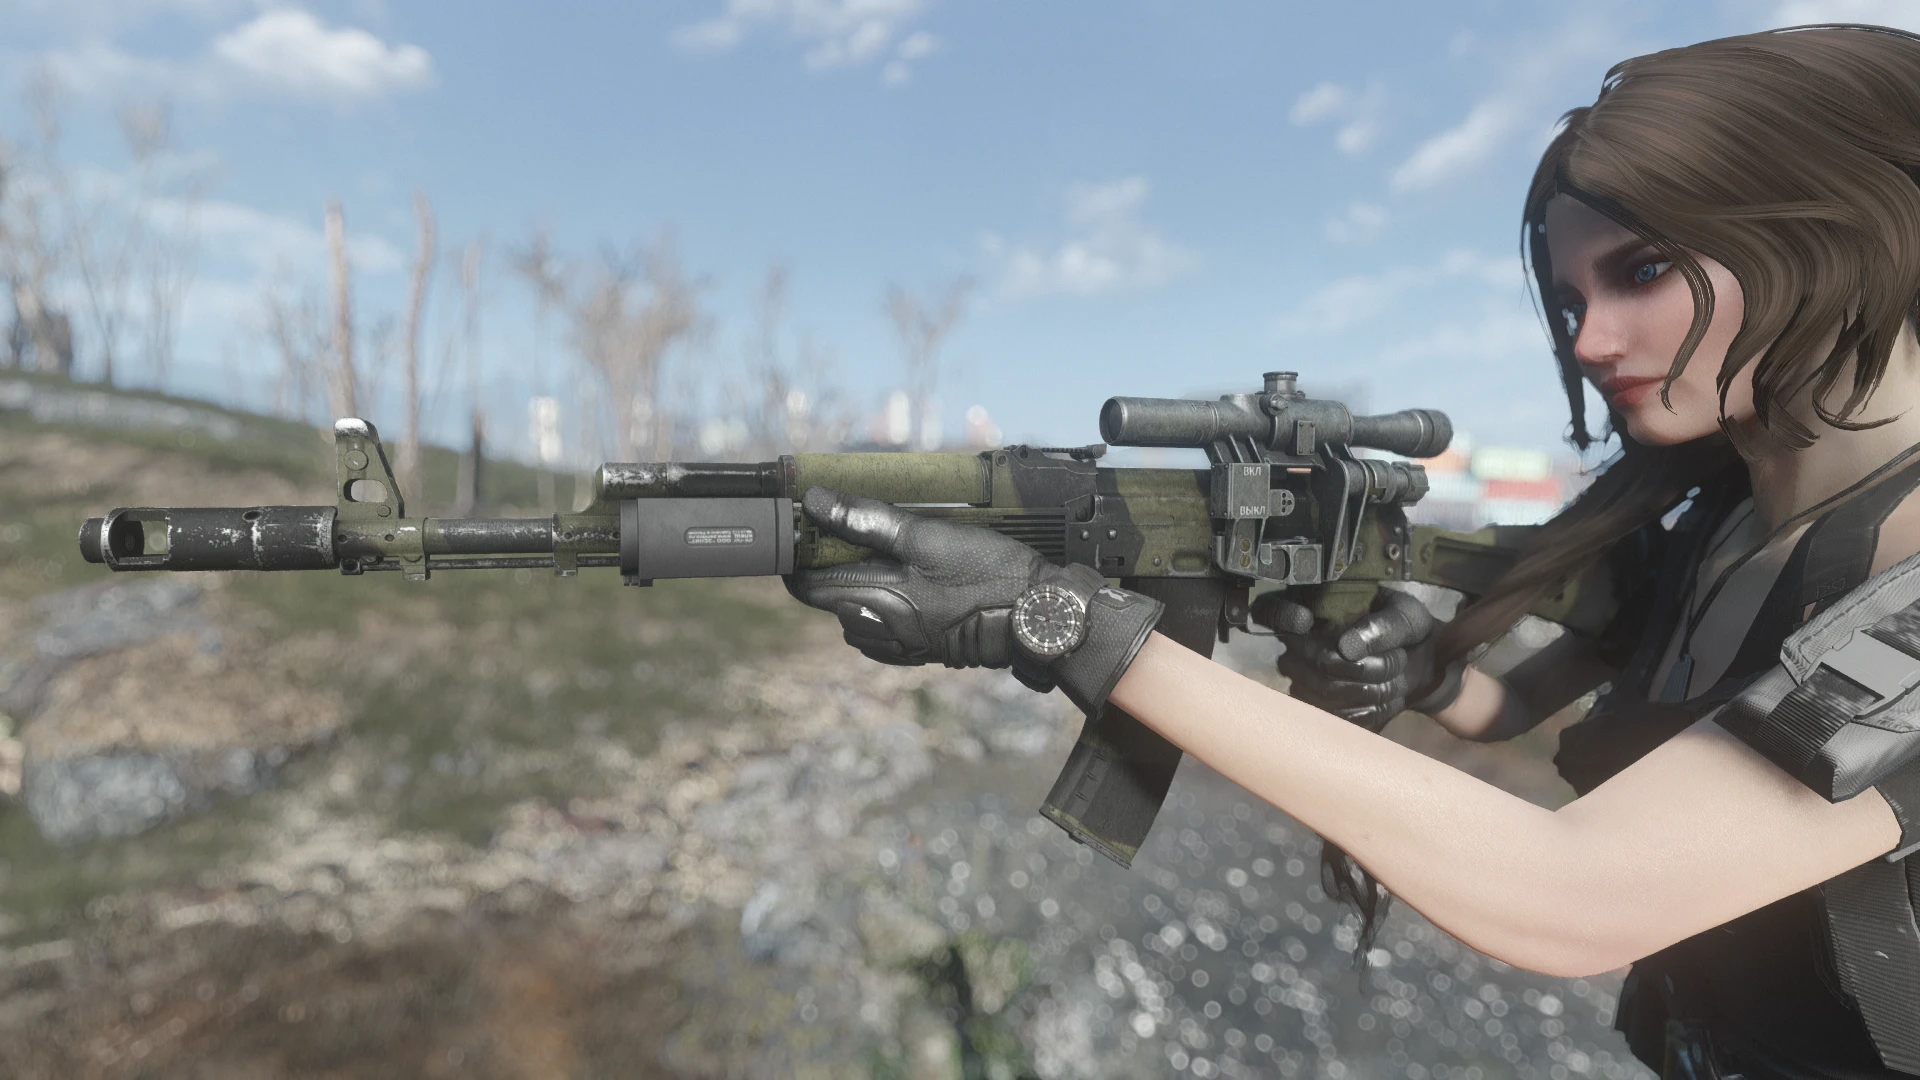 Assault rifles in fallout 4 фото 17